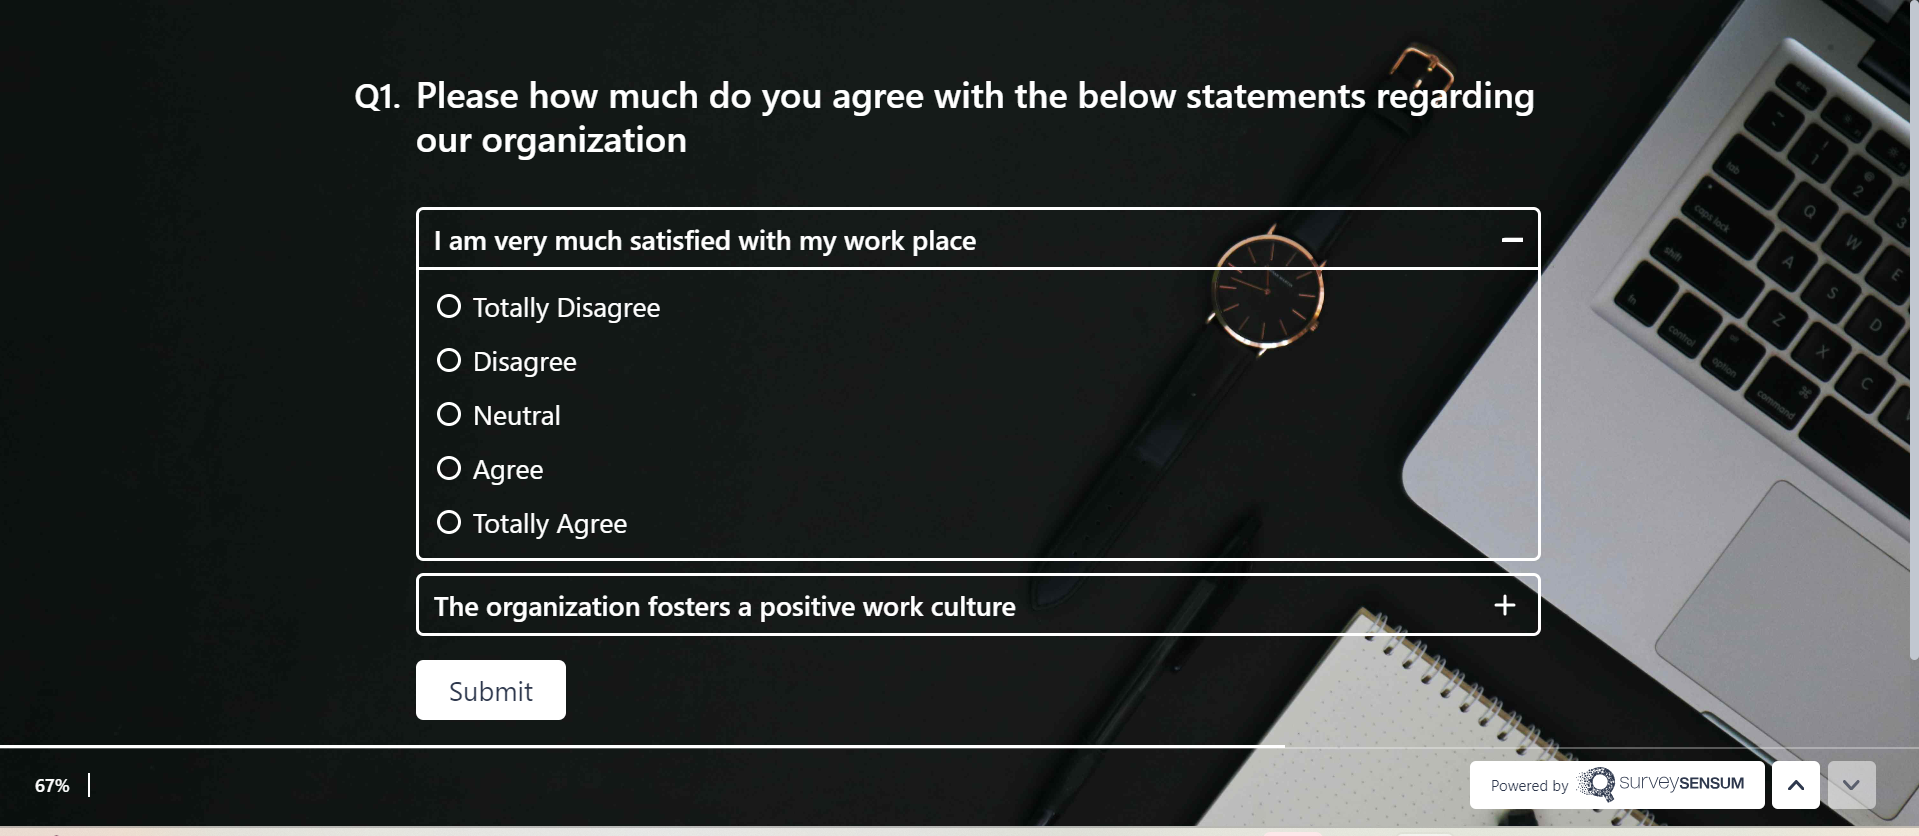 This is the image of an employee satisfaction survey created via the employee feedback tool, Surveysensum. 